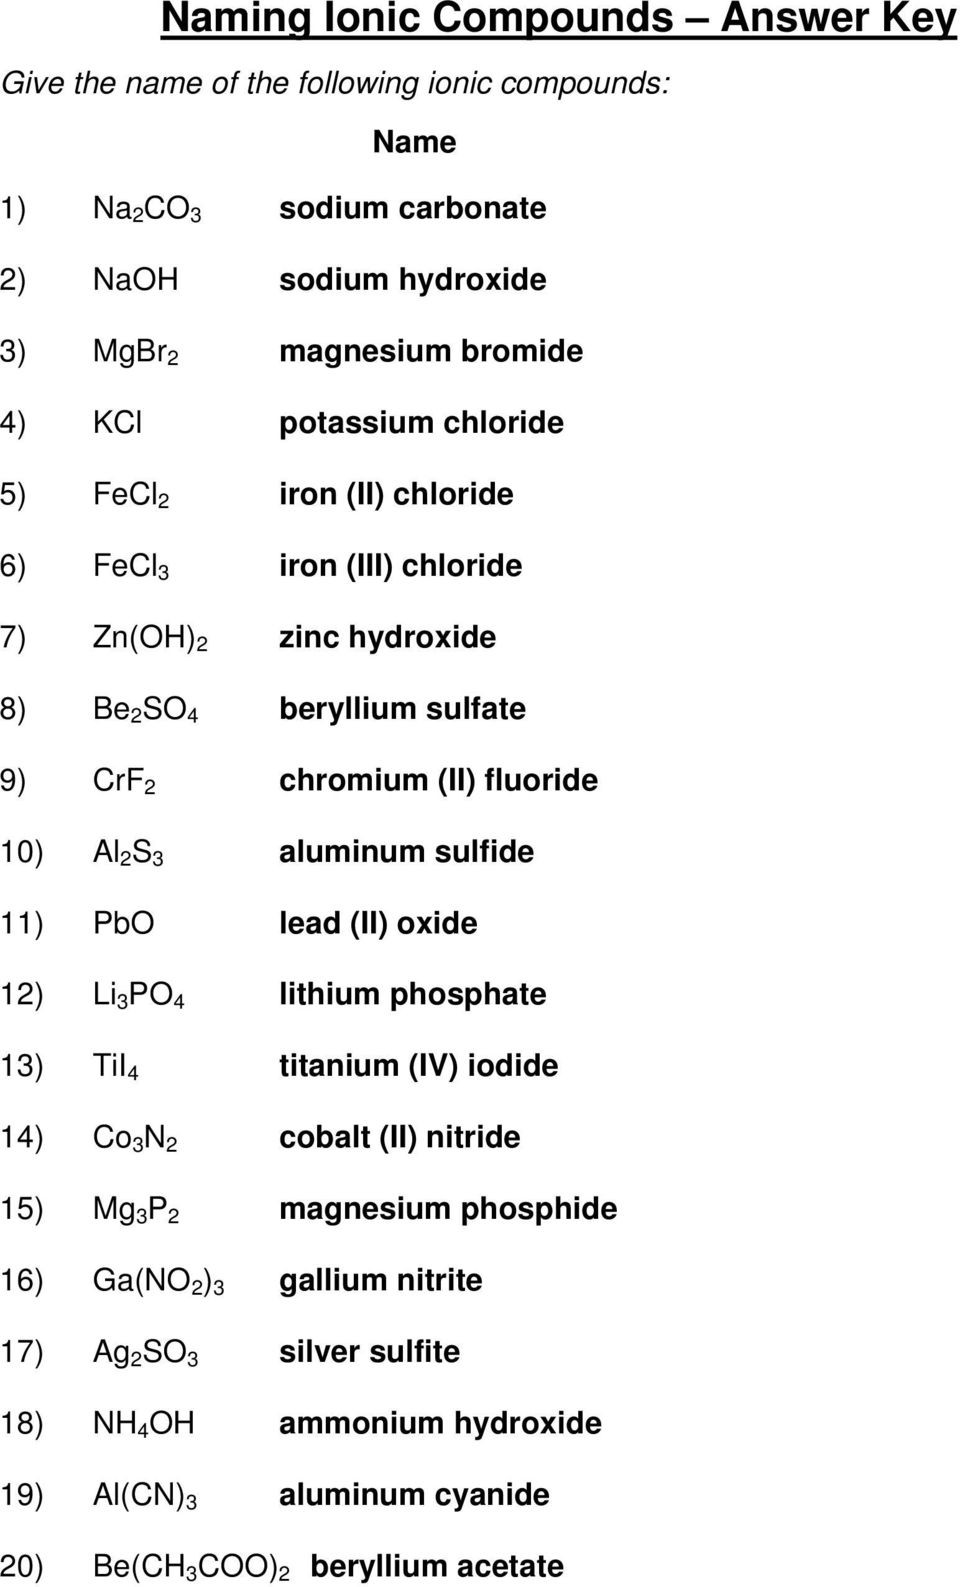 Naming Chemical Compounds Worksheet Answers Naming Ionic Pounds Answer Key Pdf Free Download